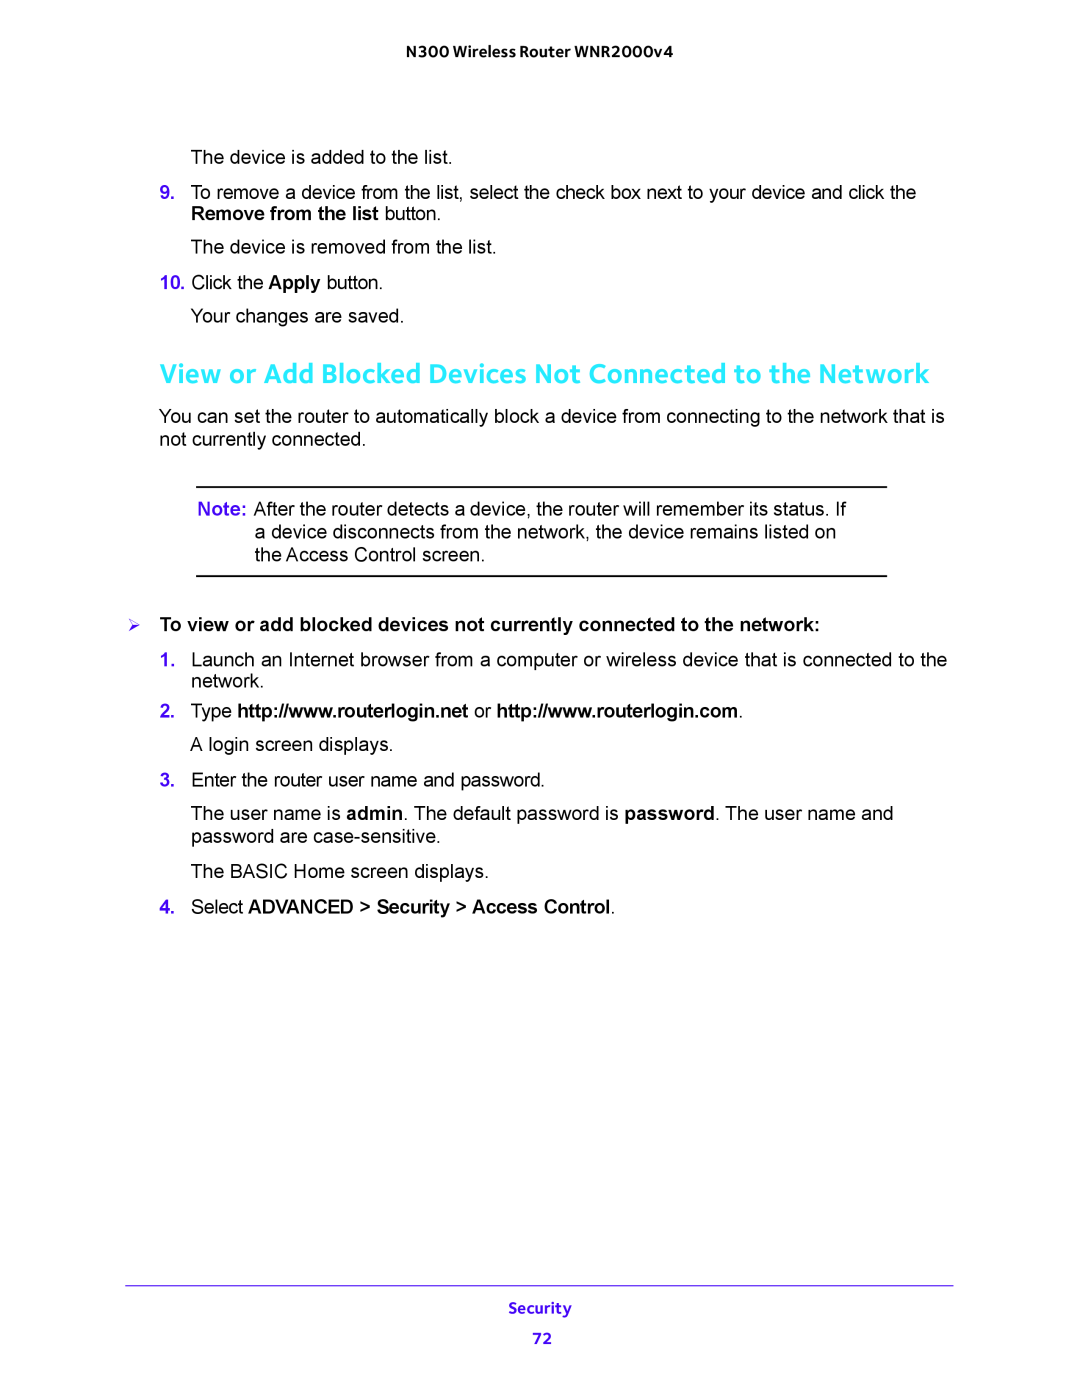 NETGEAR WNR2000 View or Add Blocked Devices Not Connected to the Network, Select ADVANCED Security Access Control 